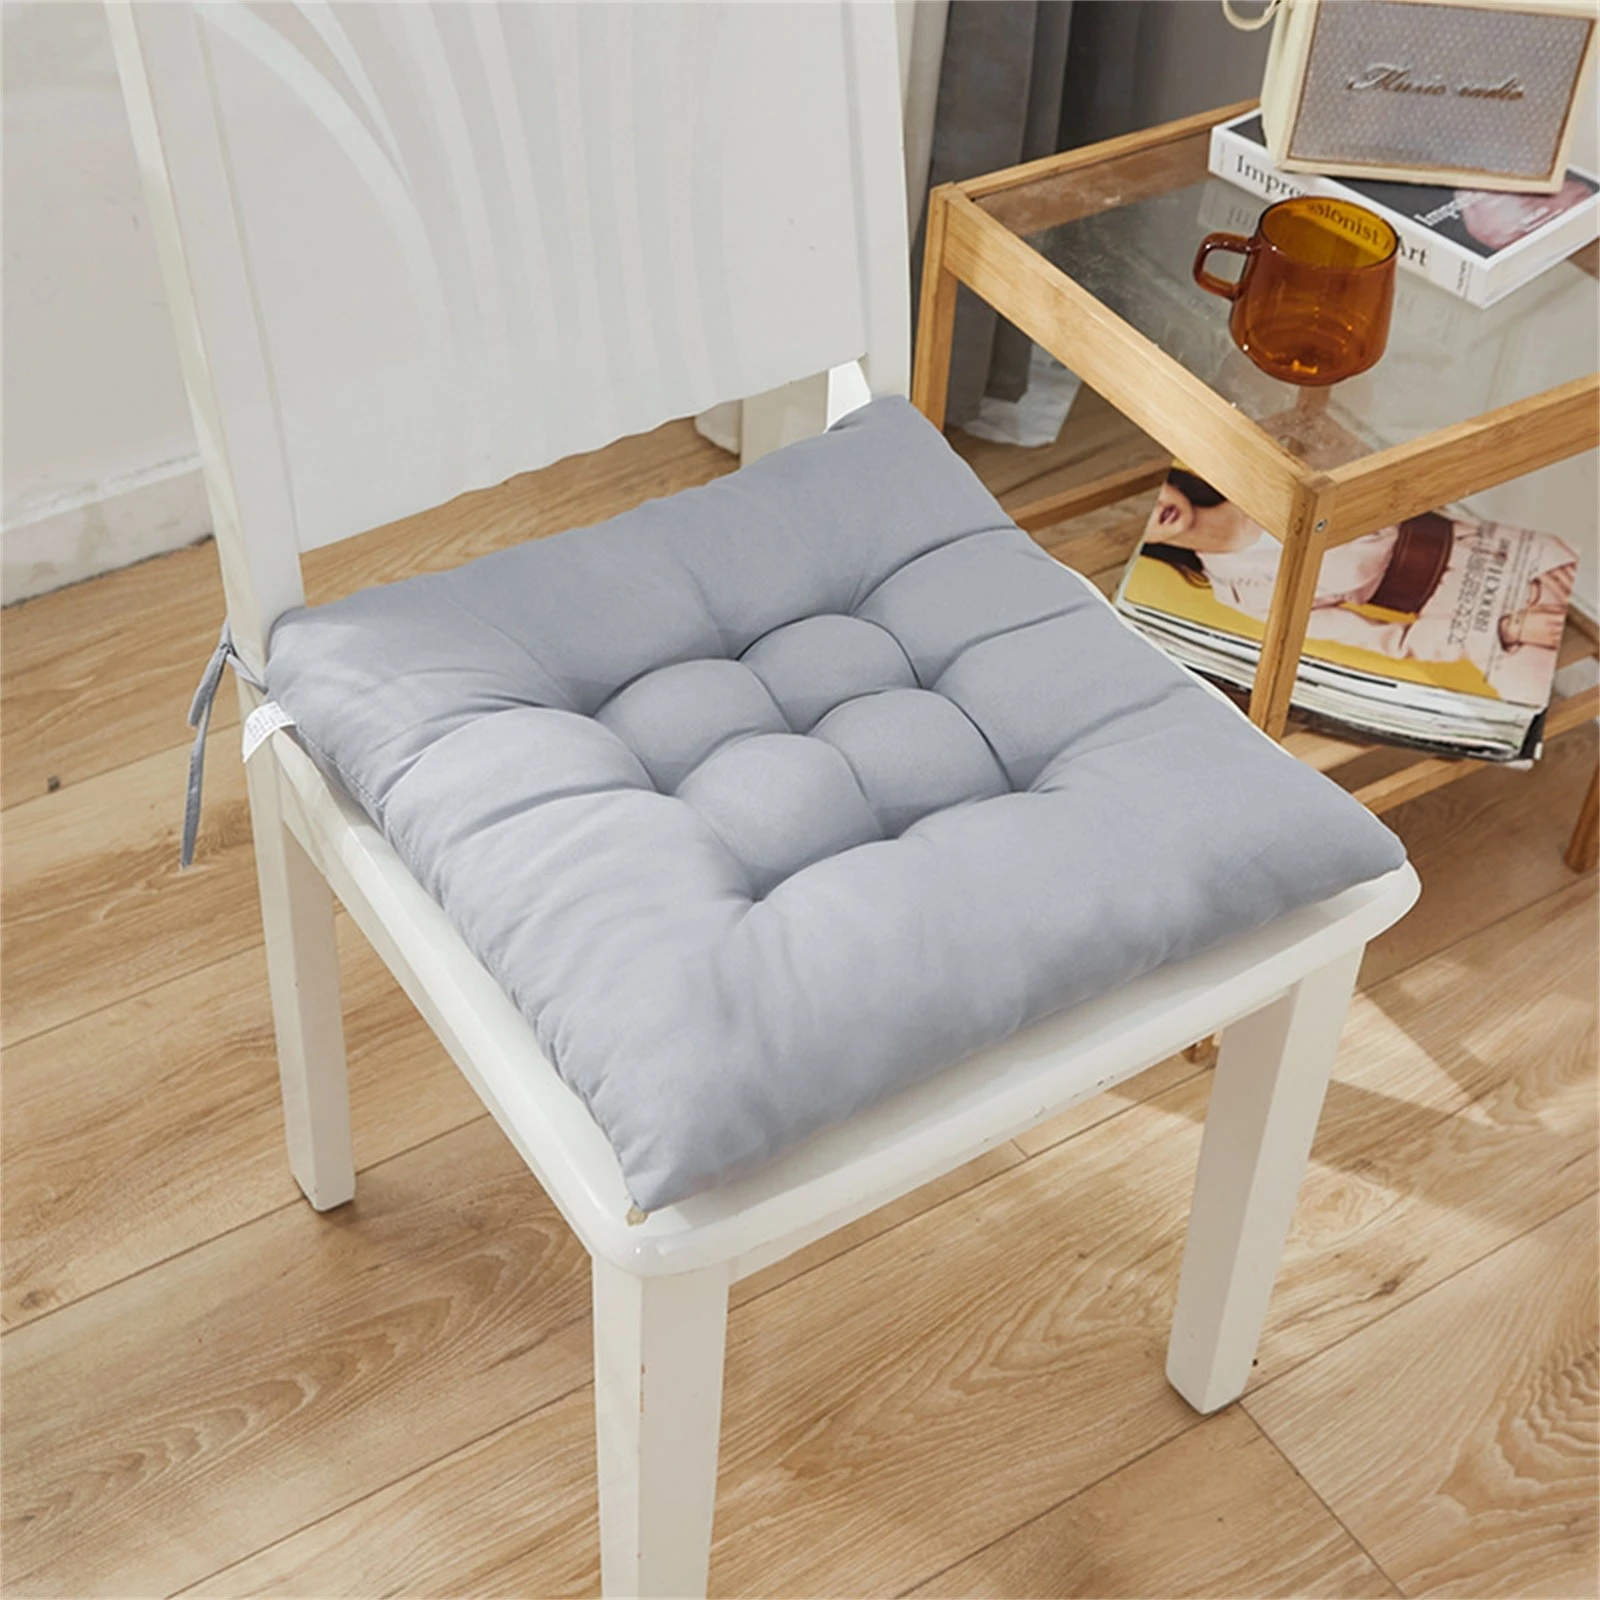 New Arrival Chair Cushion Square Cotton Upholstery Soft Padded Solid Color Sanded Cushion Pad Office Home Or Car Dropshipping scatter cushions